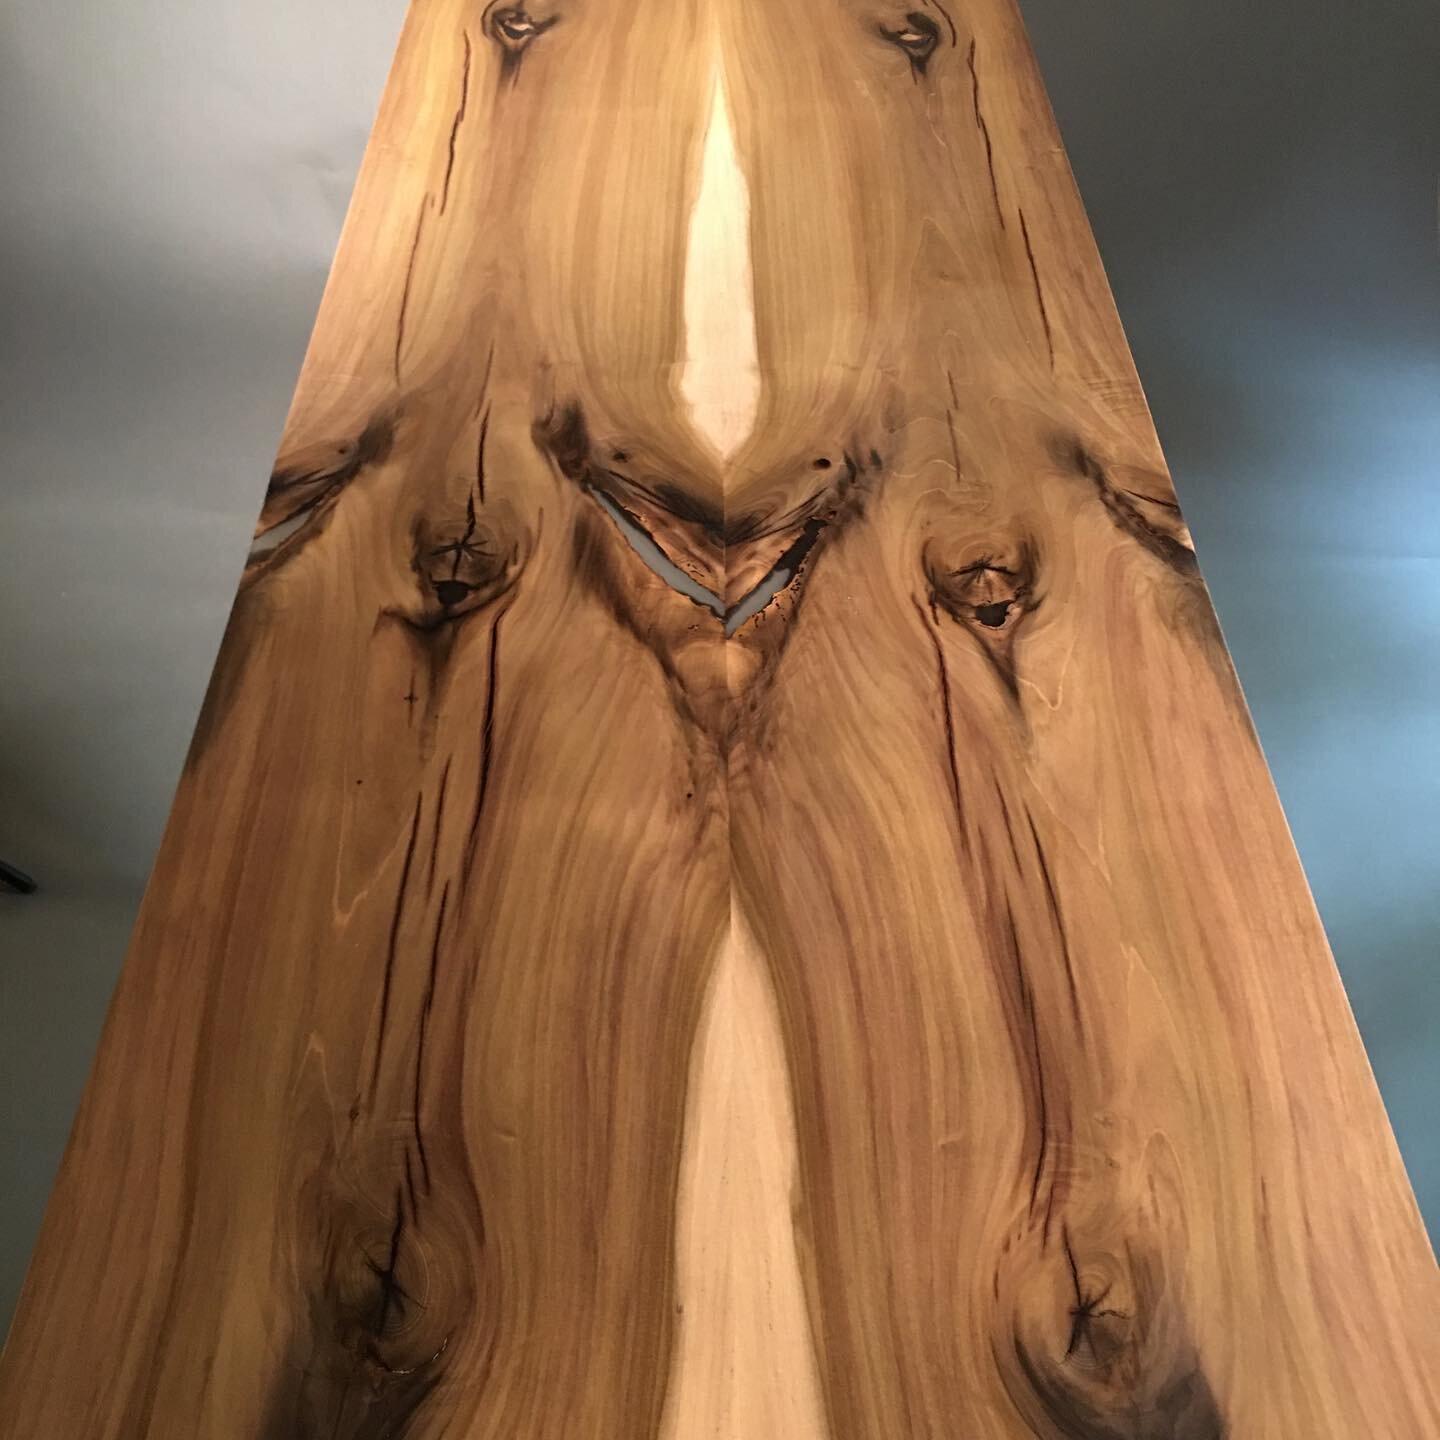 New project from Split Cedar Studios-a Poplar dining room table. I love Poplar. The color morphs from cream to brown, green, black all the way to purple. The modeled grain and book-matched surface creates drama. Tapered legs and tiered skirt support 